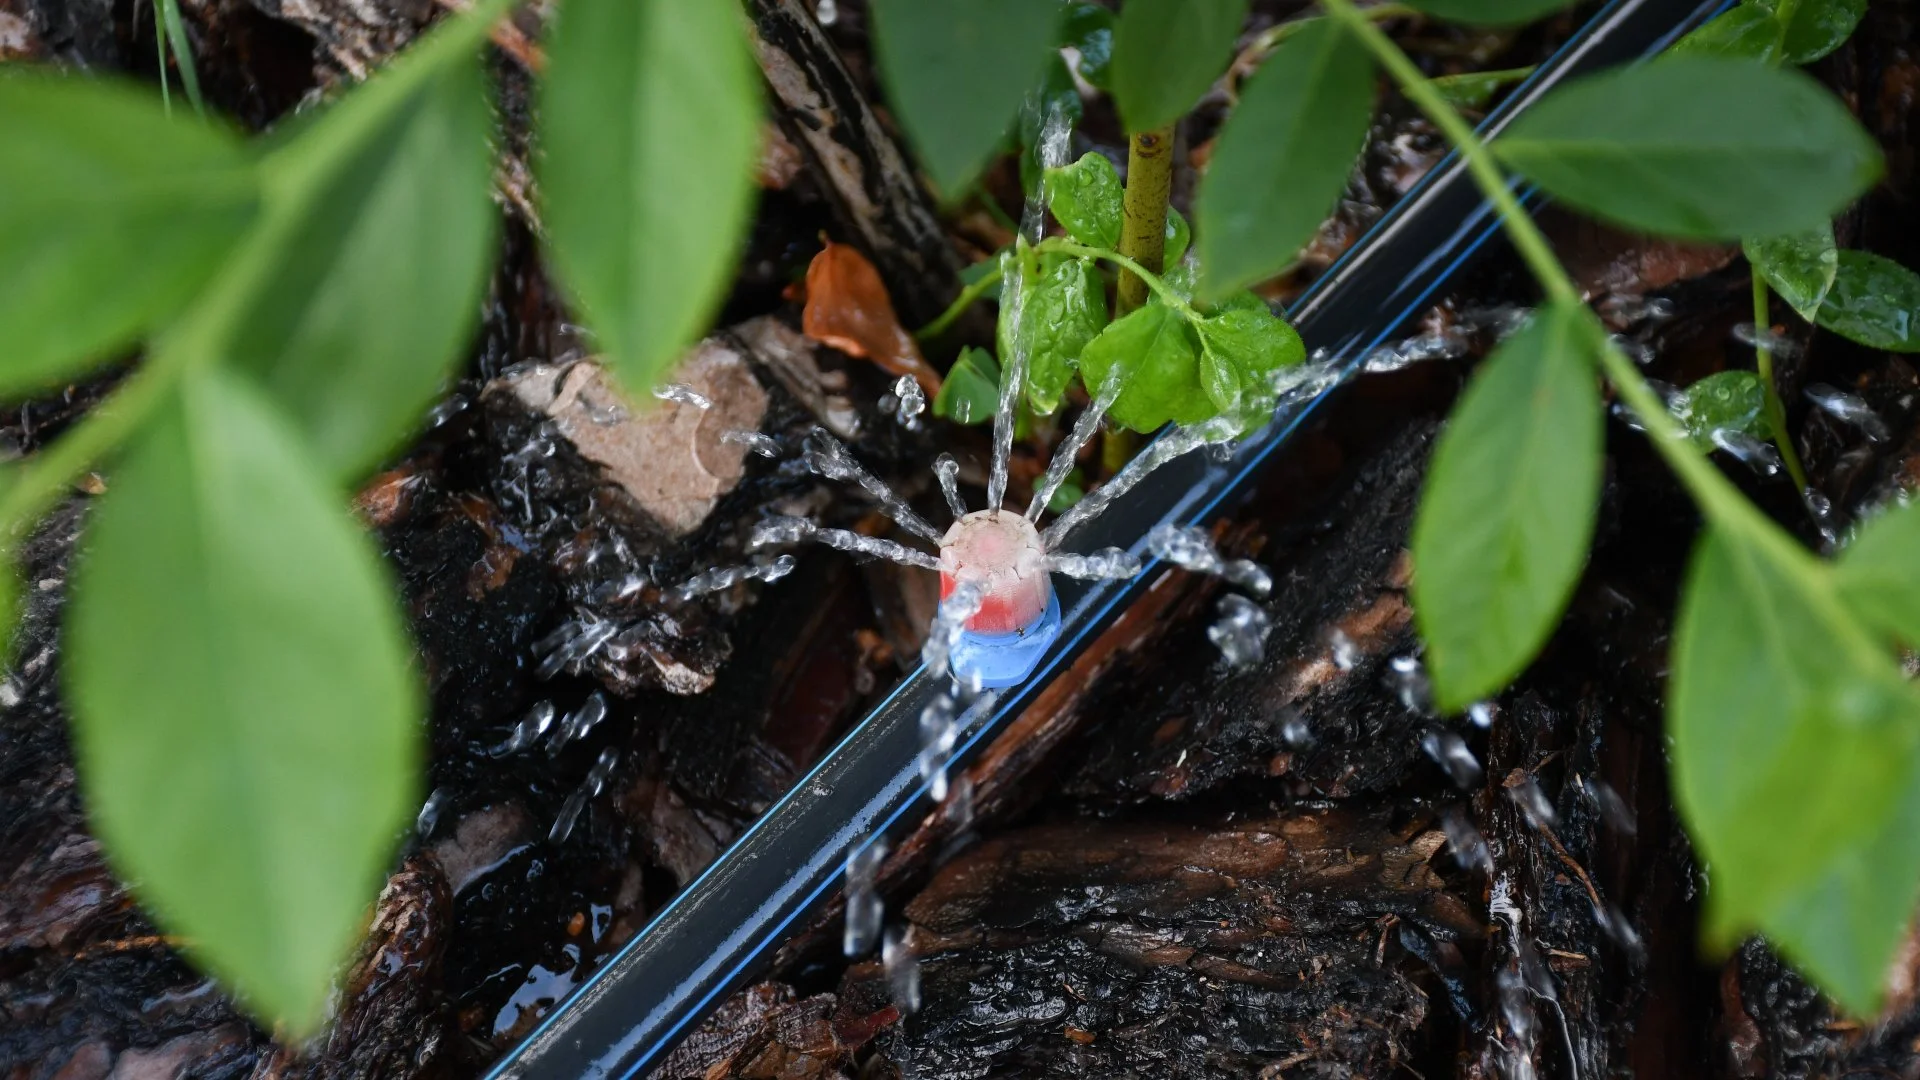 Drip Irrigation Systems Are Perfect for Landscape Beds!